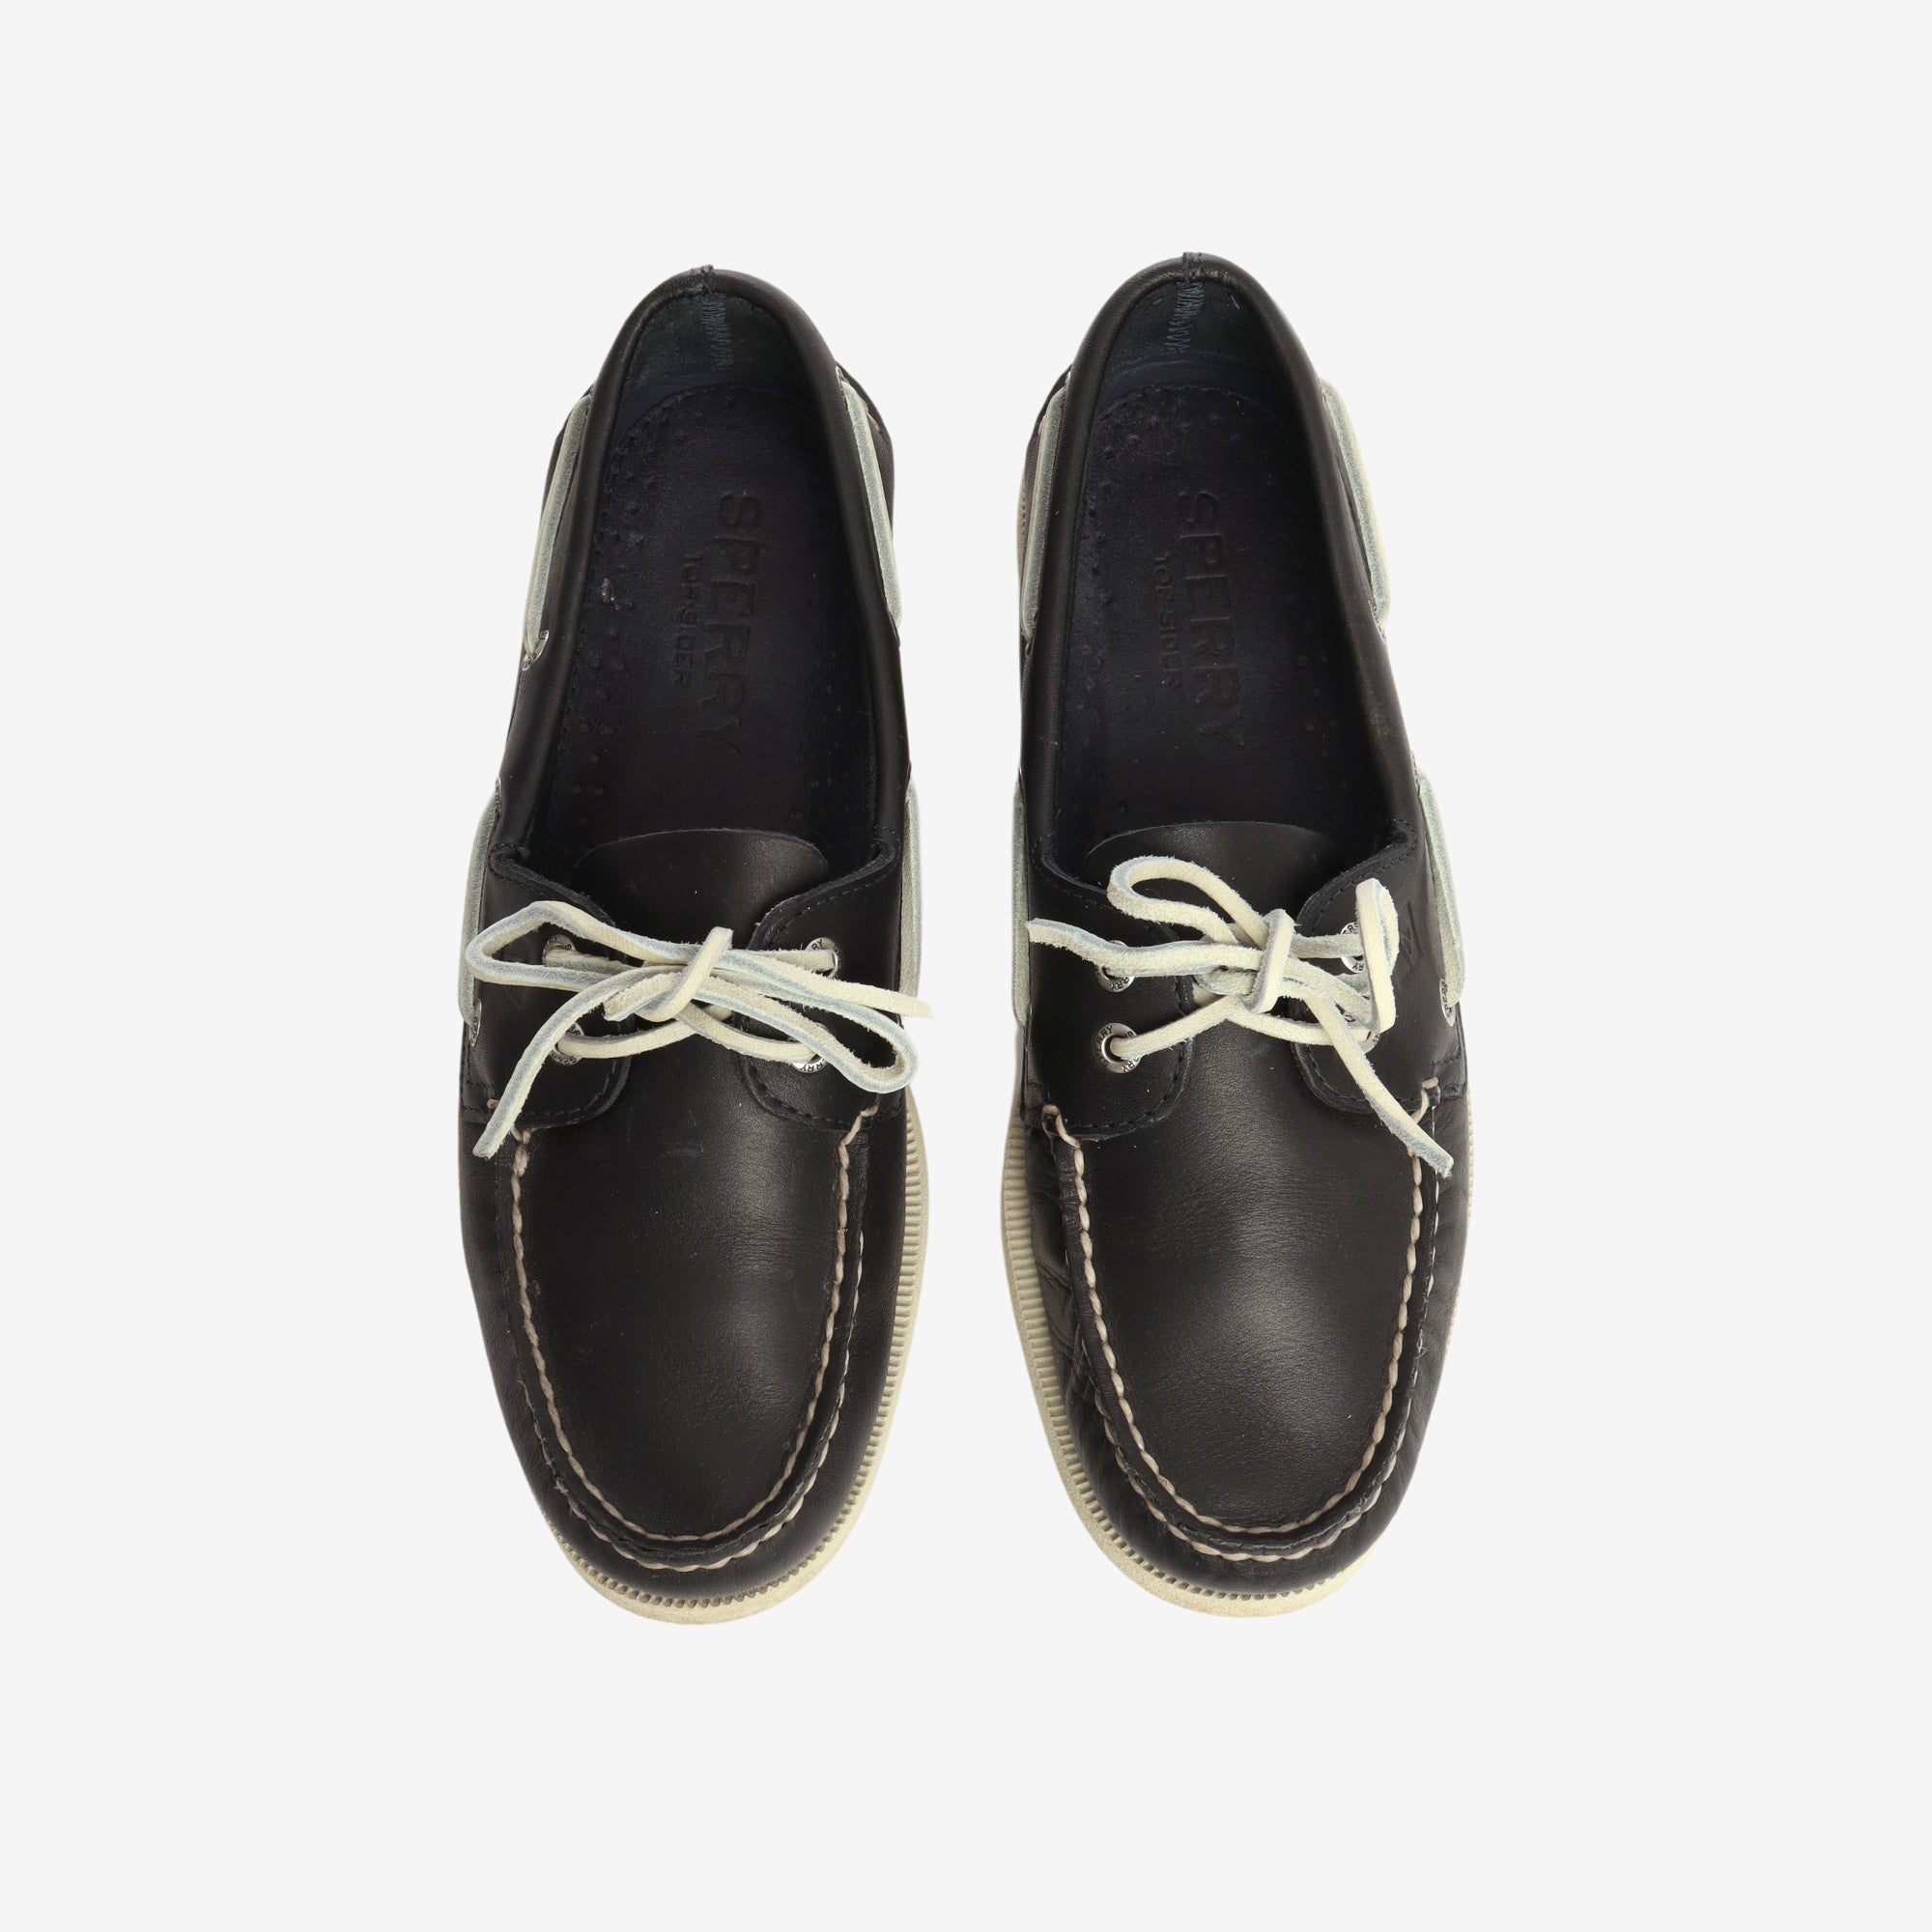 Top Sider Boat Shoes